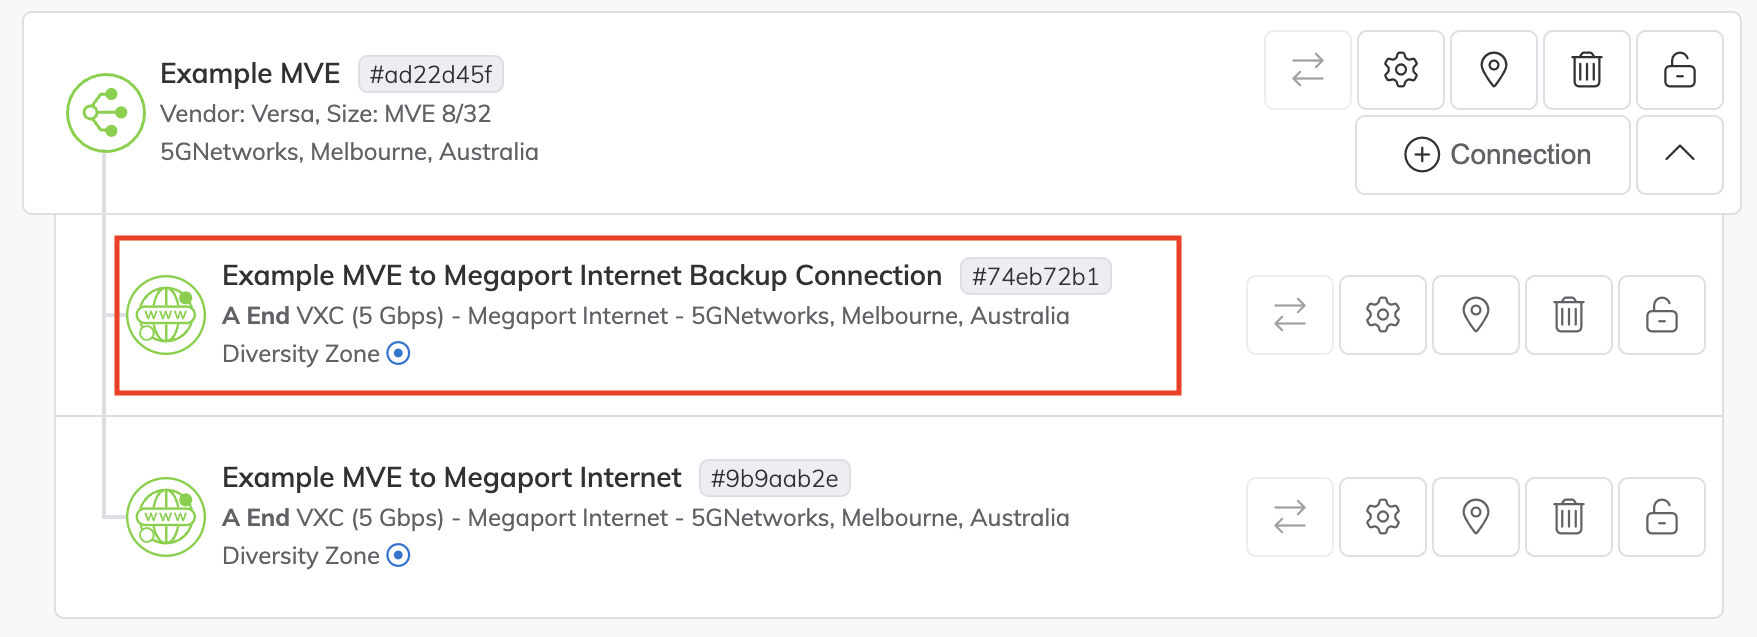 Megaport Internet connection deployed and visible in the Megaport Portal